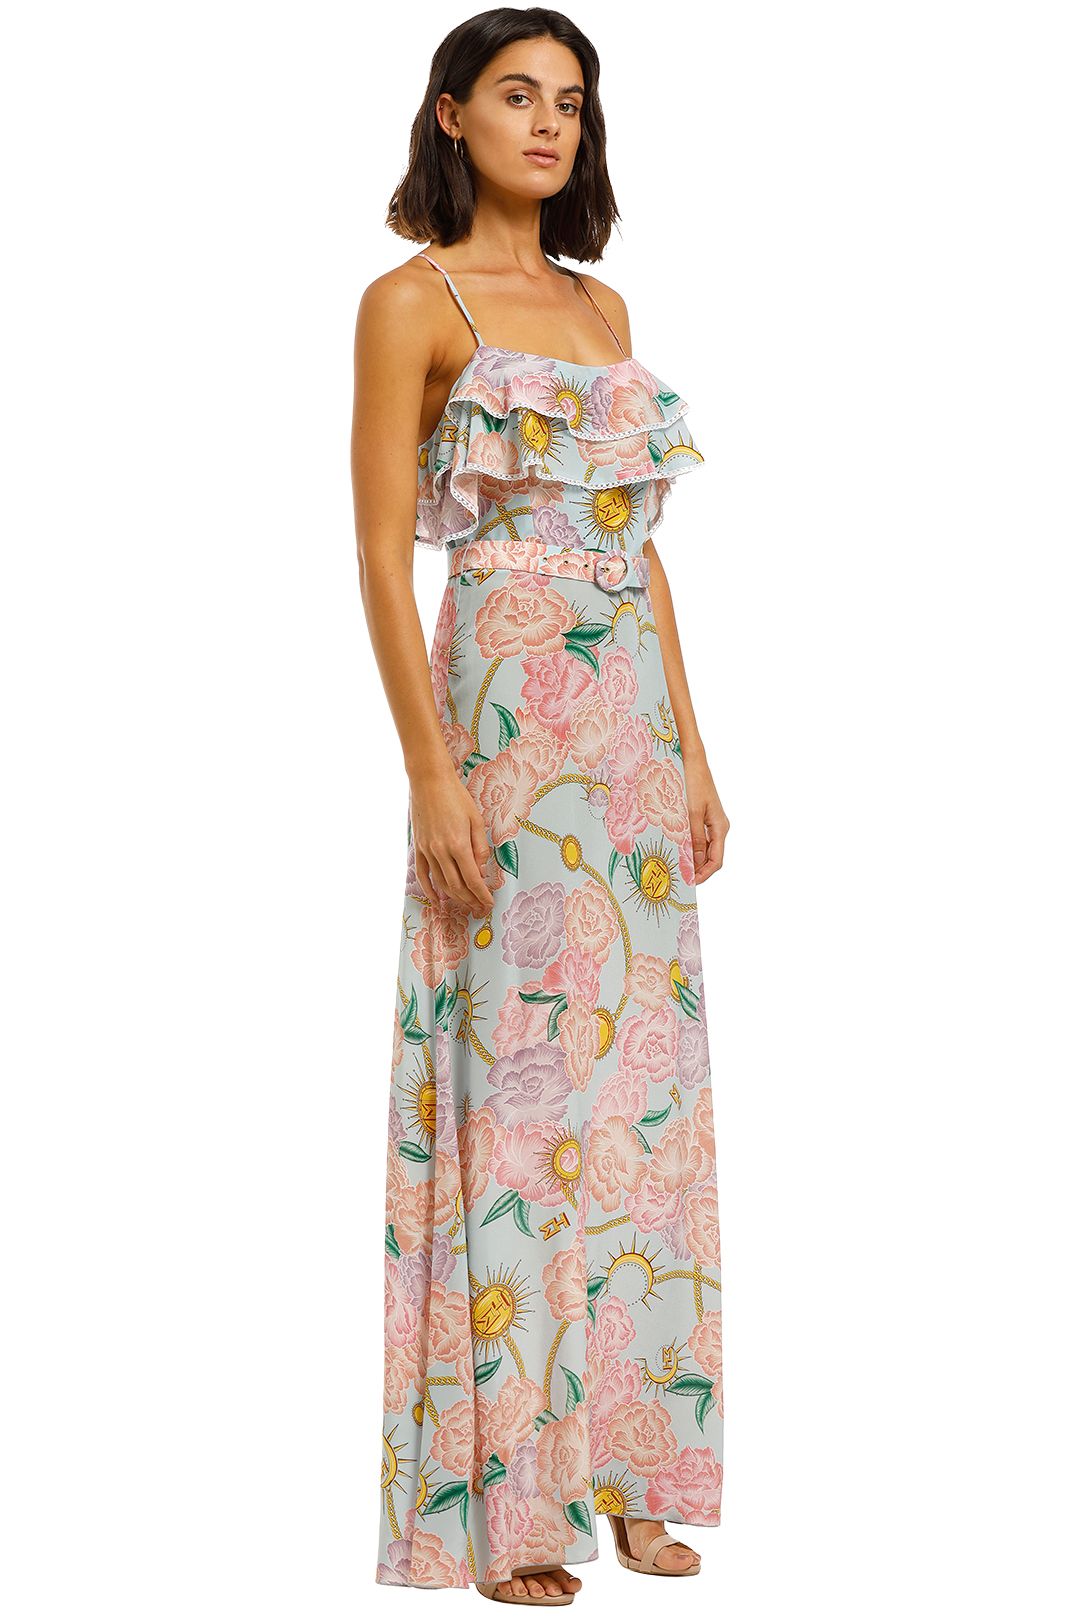 Hayley-Menzies-Maxi-Frill-Dress-Floral-Print-Side